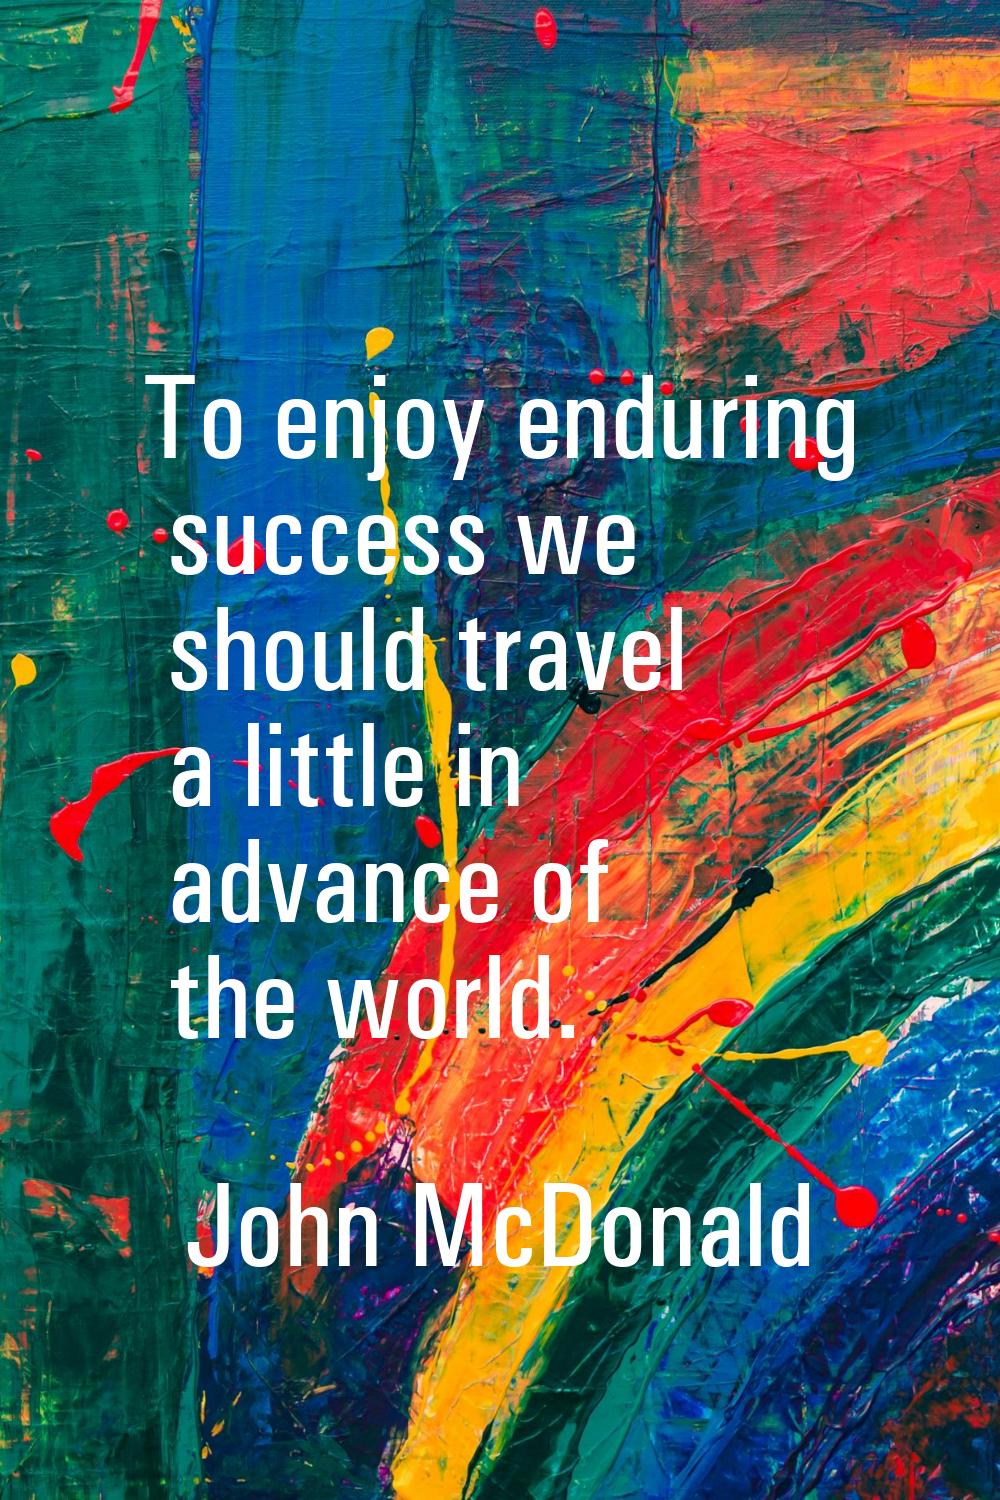 To enjoy enduring success we should travel a little in advance of the world.